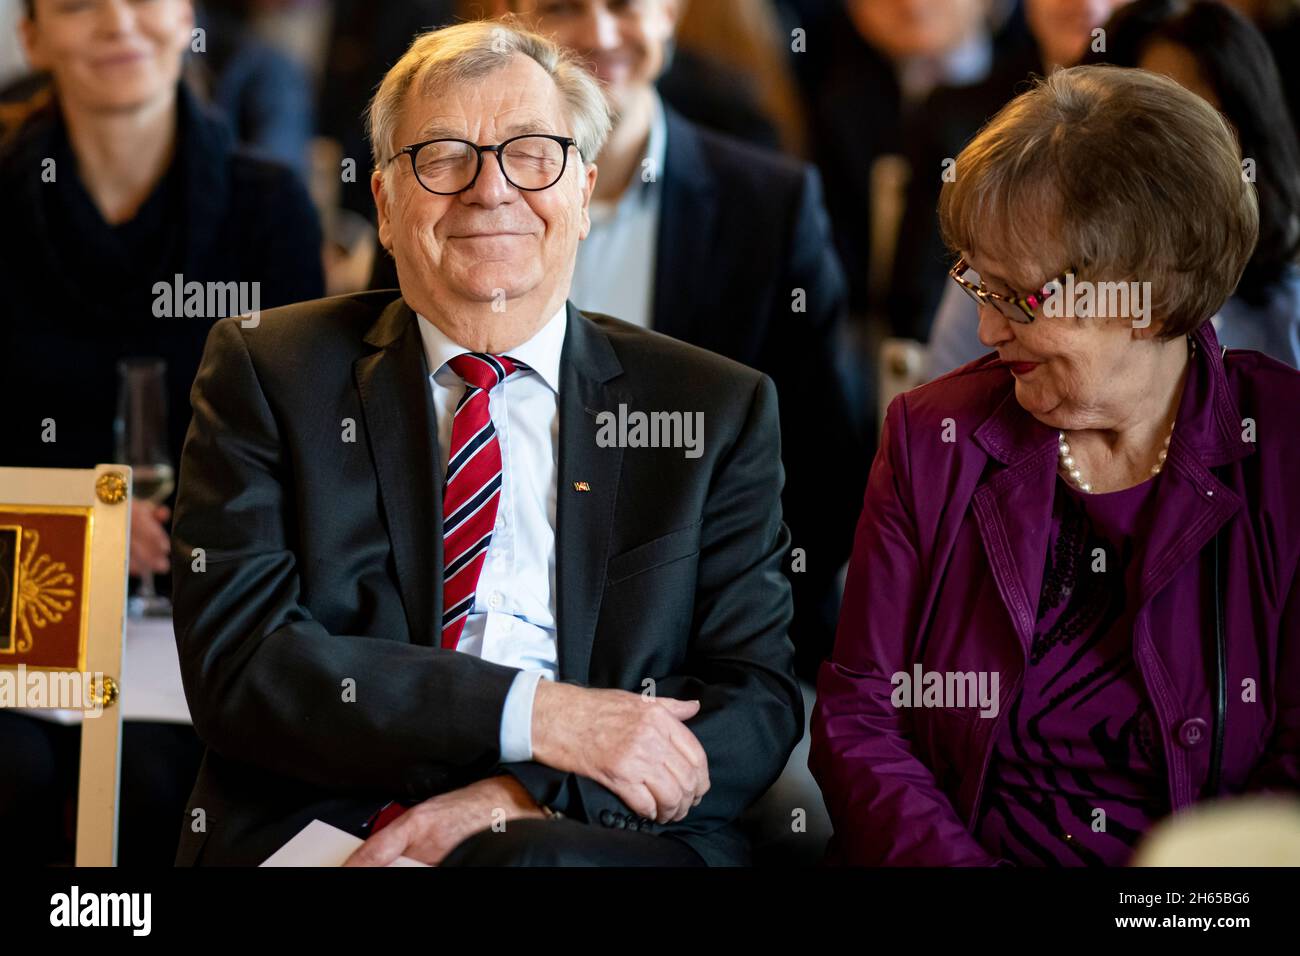 Berlin, Germany. 13th Nov, 2021. Eberhard Diepgen (CDU), Berlin's former governing mayor, and his wife Monika Diepgen sit in the front row at the reception for his 80th birthday at Schloss Friedrichsfelde. The CDU politician Diepgen was mayor of Berlin from 1984 to 1989 and from 1991 to 2001. Credit: Fabian Sommer/dpa/Alamy Live News Stock Photo